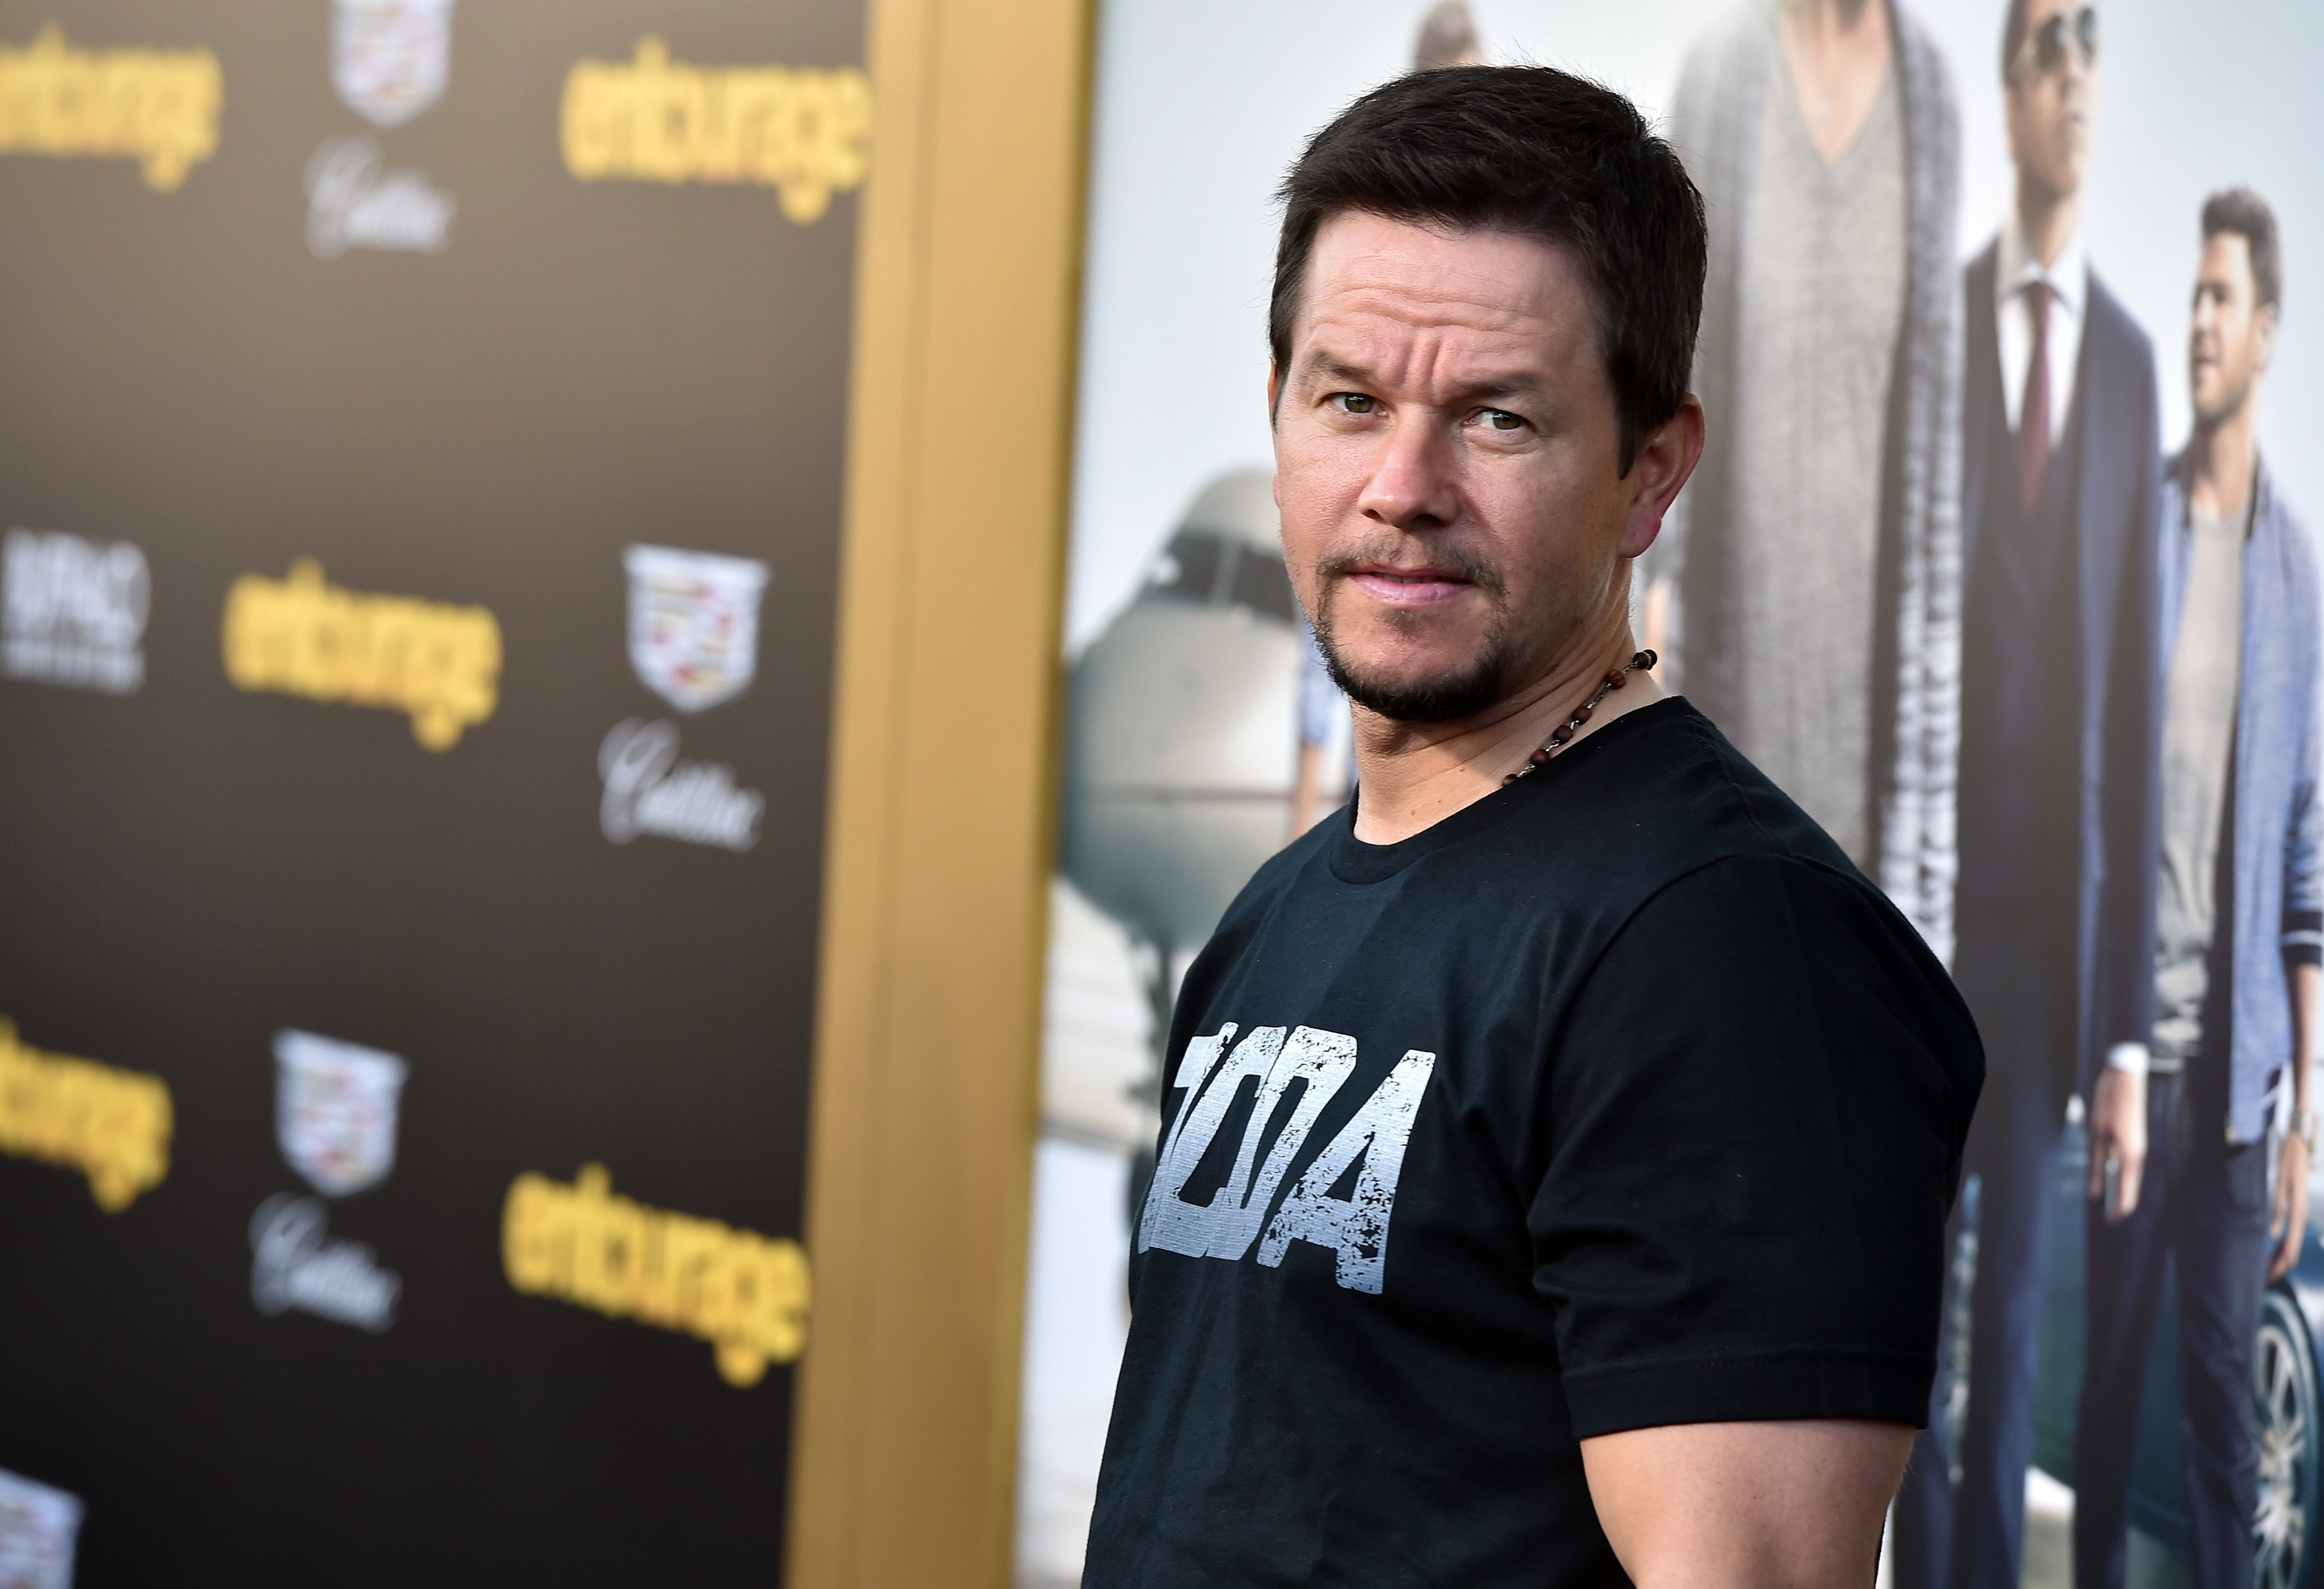 Actor and producer Mark Wahlberg attends the premiere of the comedy series "Entourage" at Regency Village Theatre on June 1, 2015 in Westwood, California | Photo: Getty Images